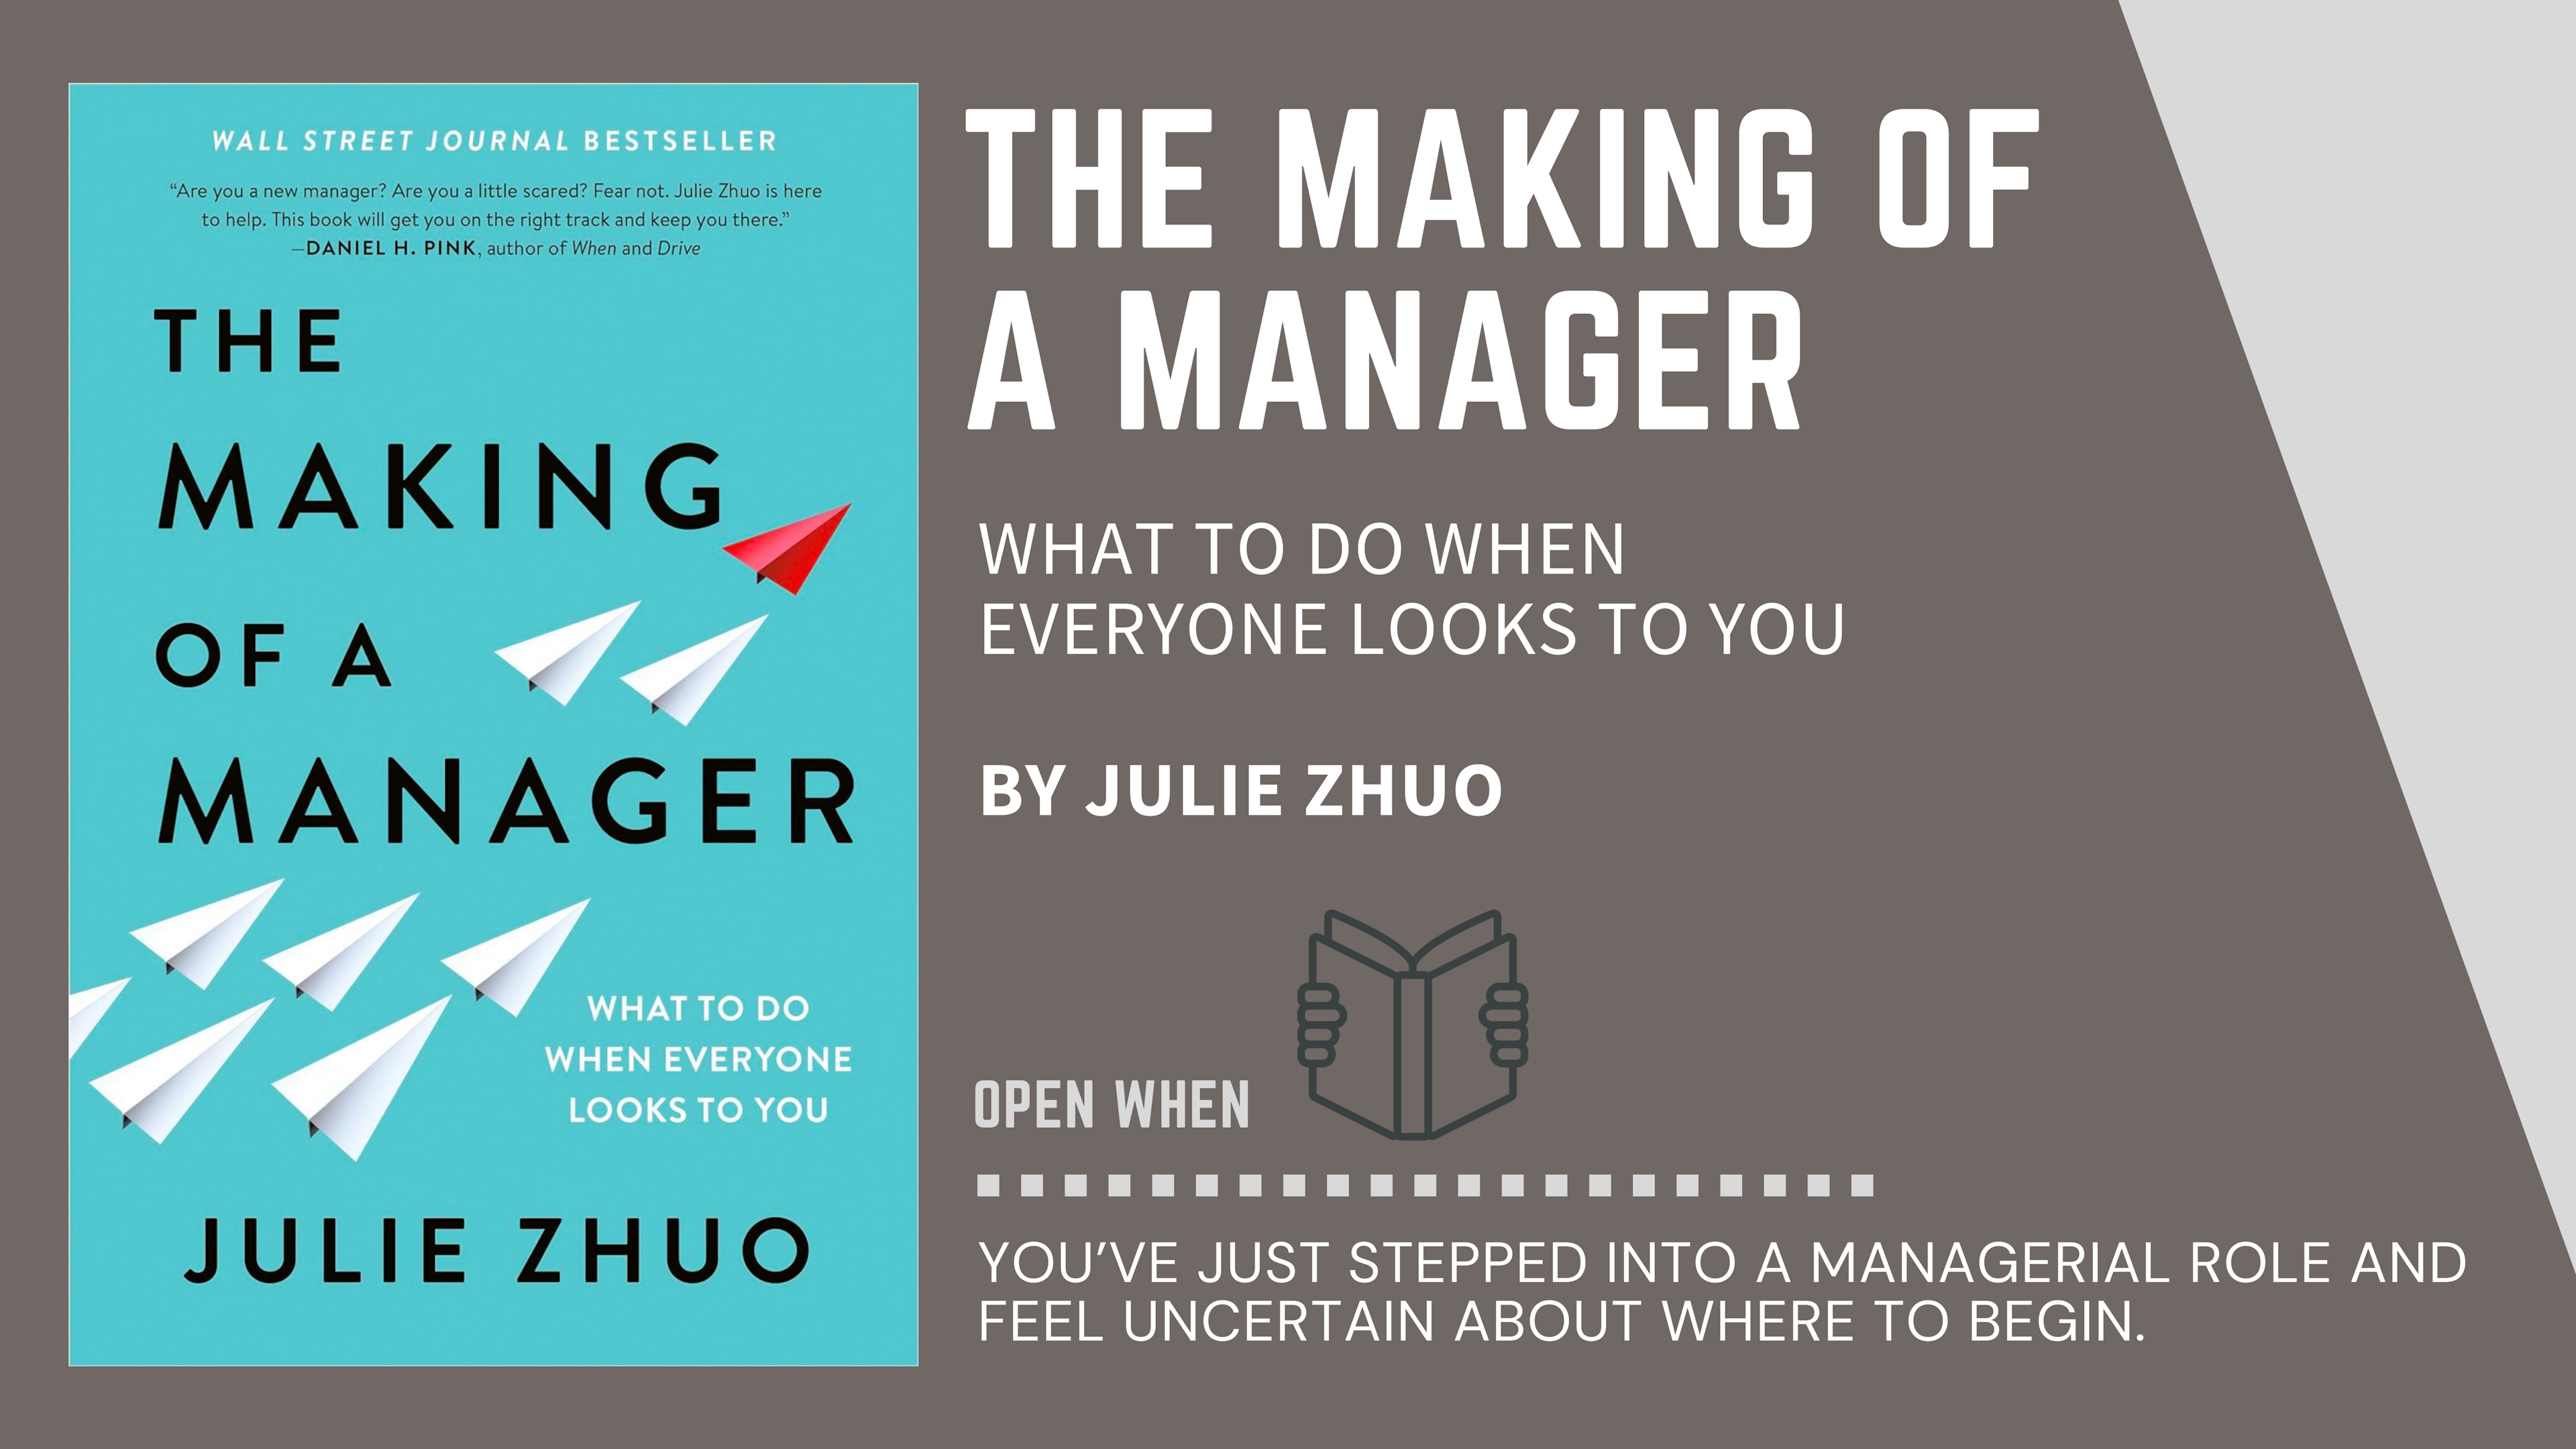 Book Cover of "The Making of a Manager" by Julie Zhuo